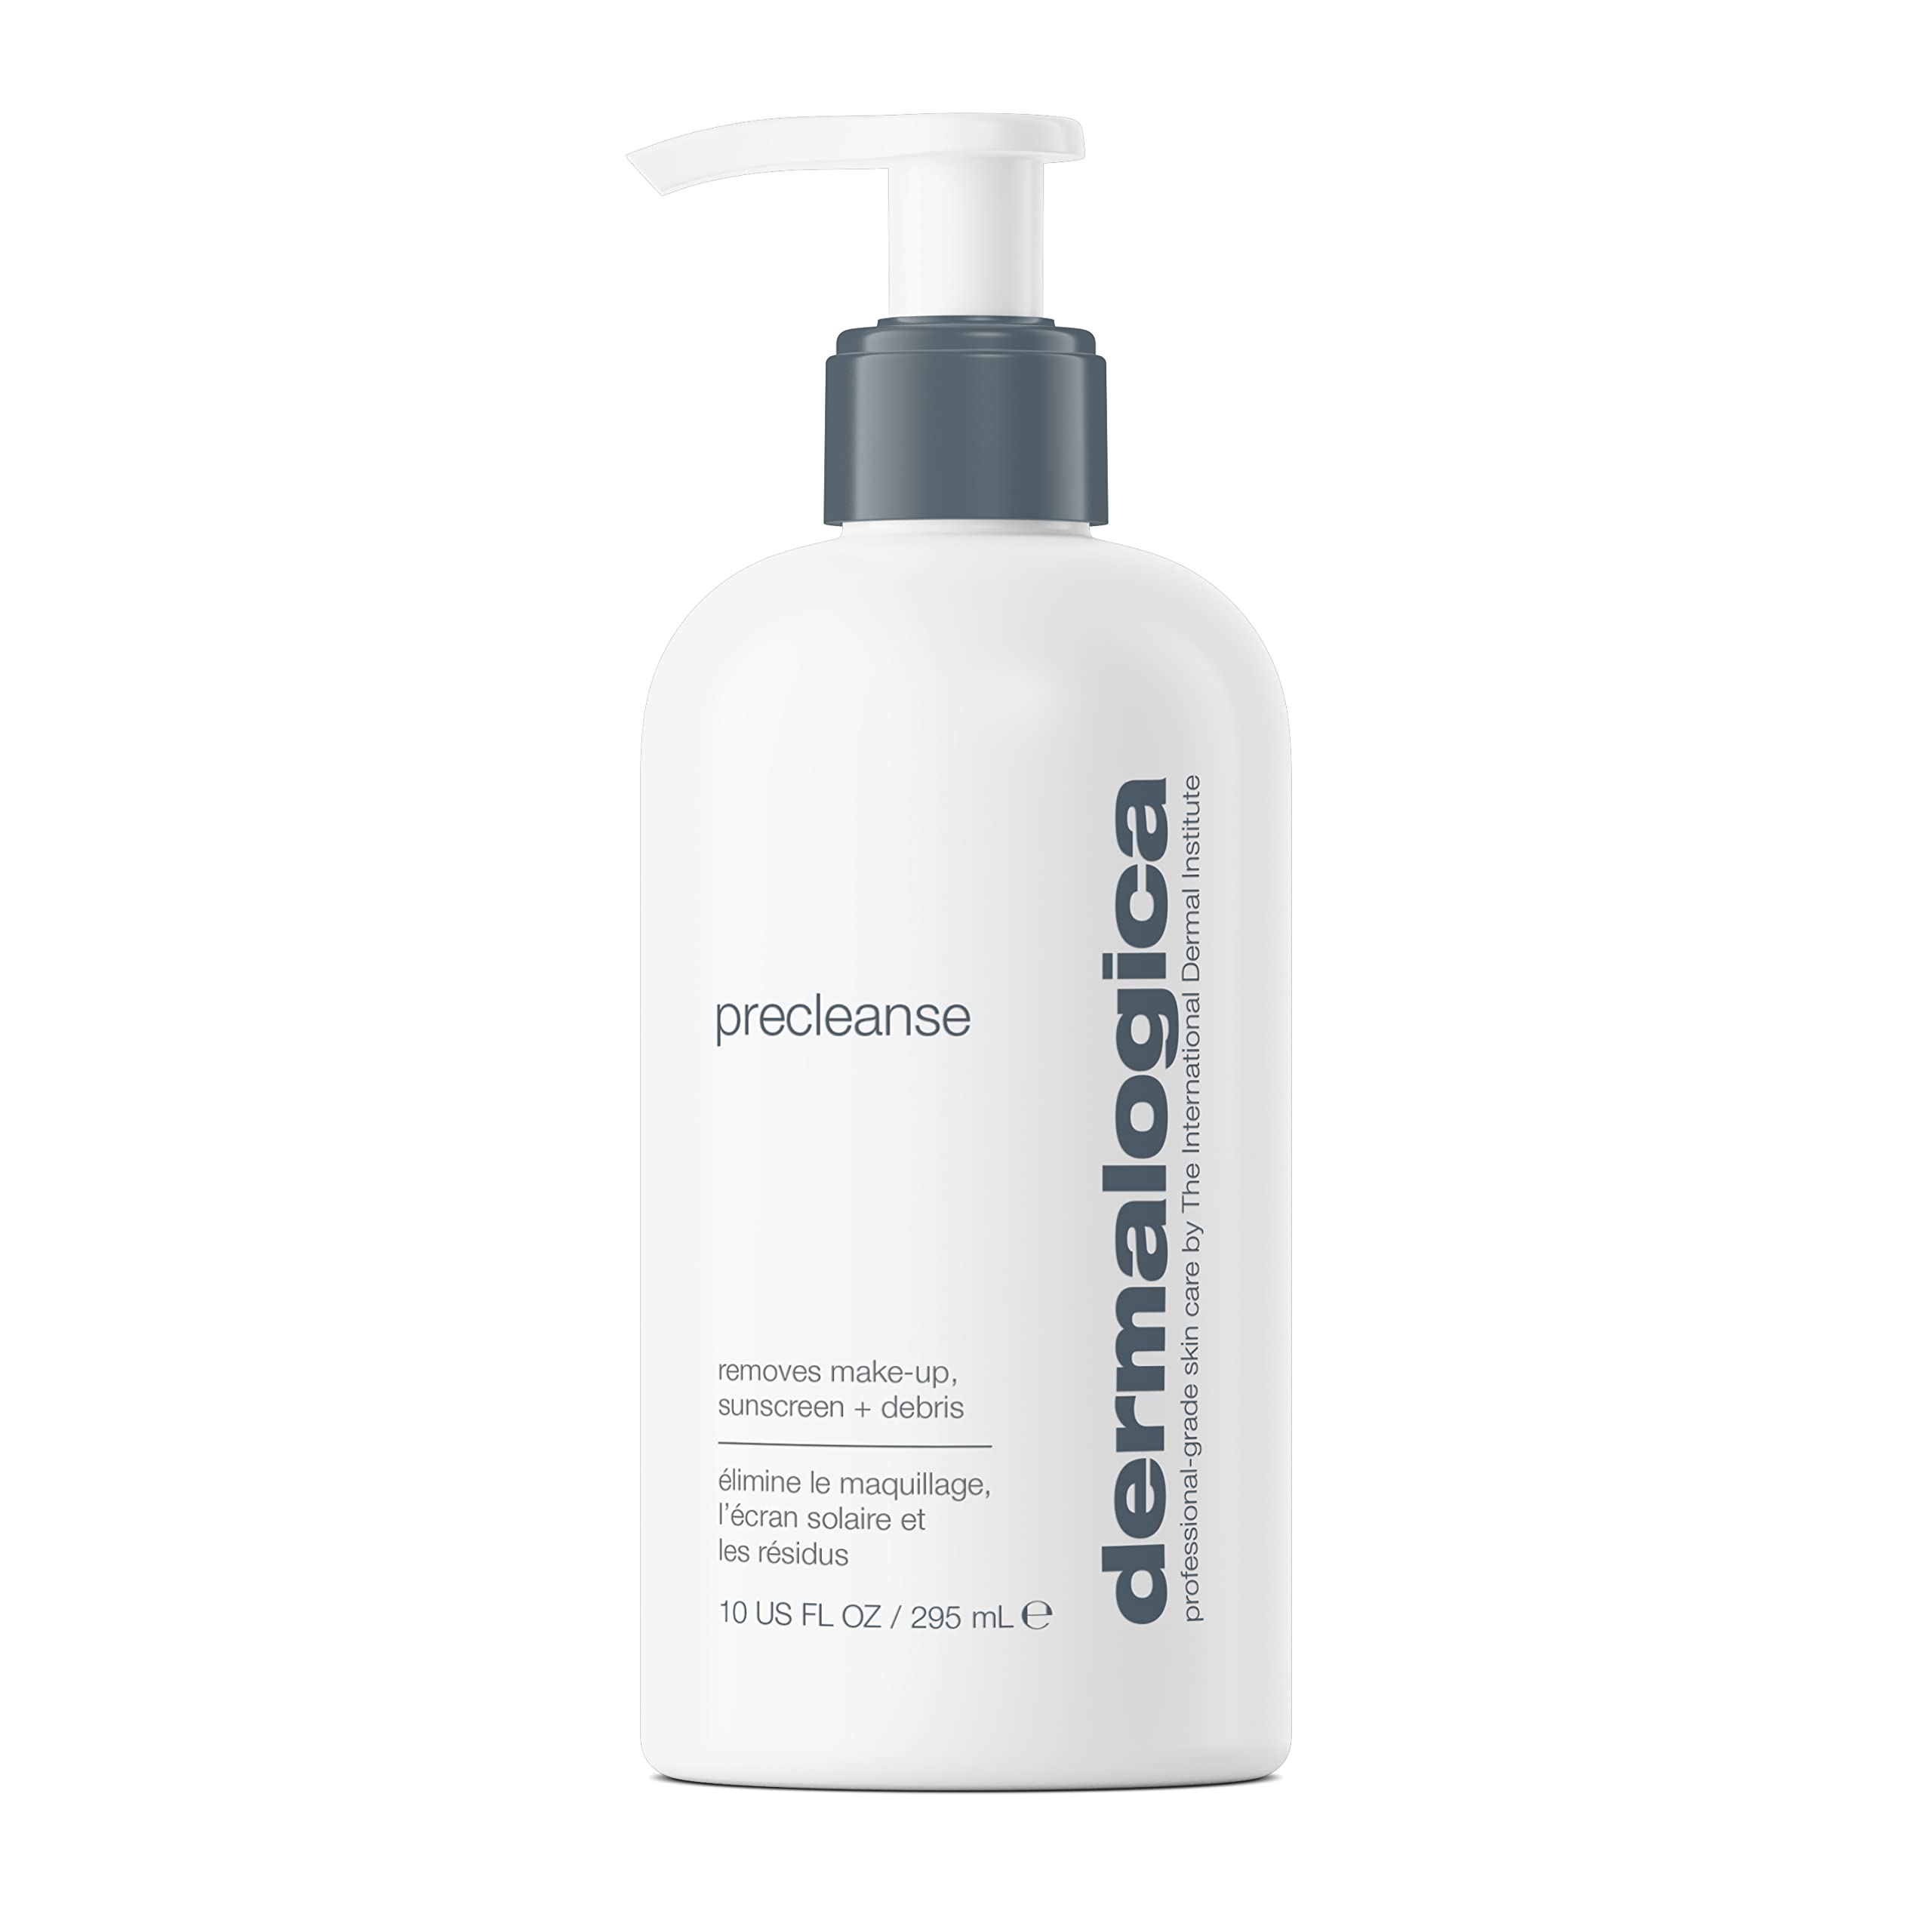 Dermalogica Precleanse (10 Fl Oz) Makeup Remover Face Wash - Melt Away Layers of Makeup, Oils, Sunscreen and Environmental Pollutants